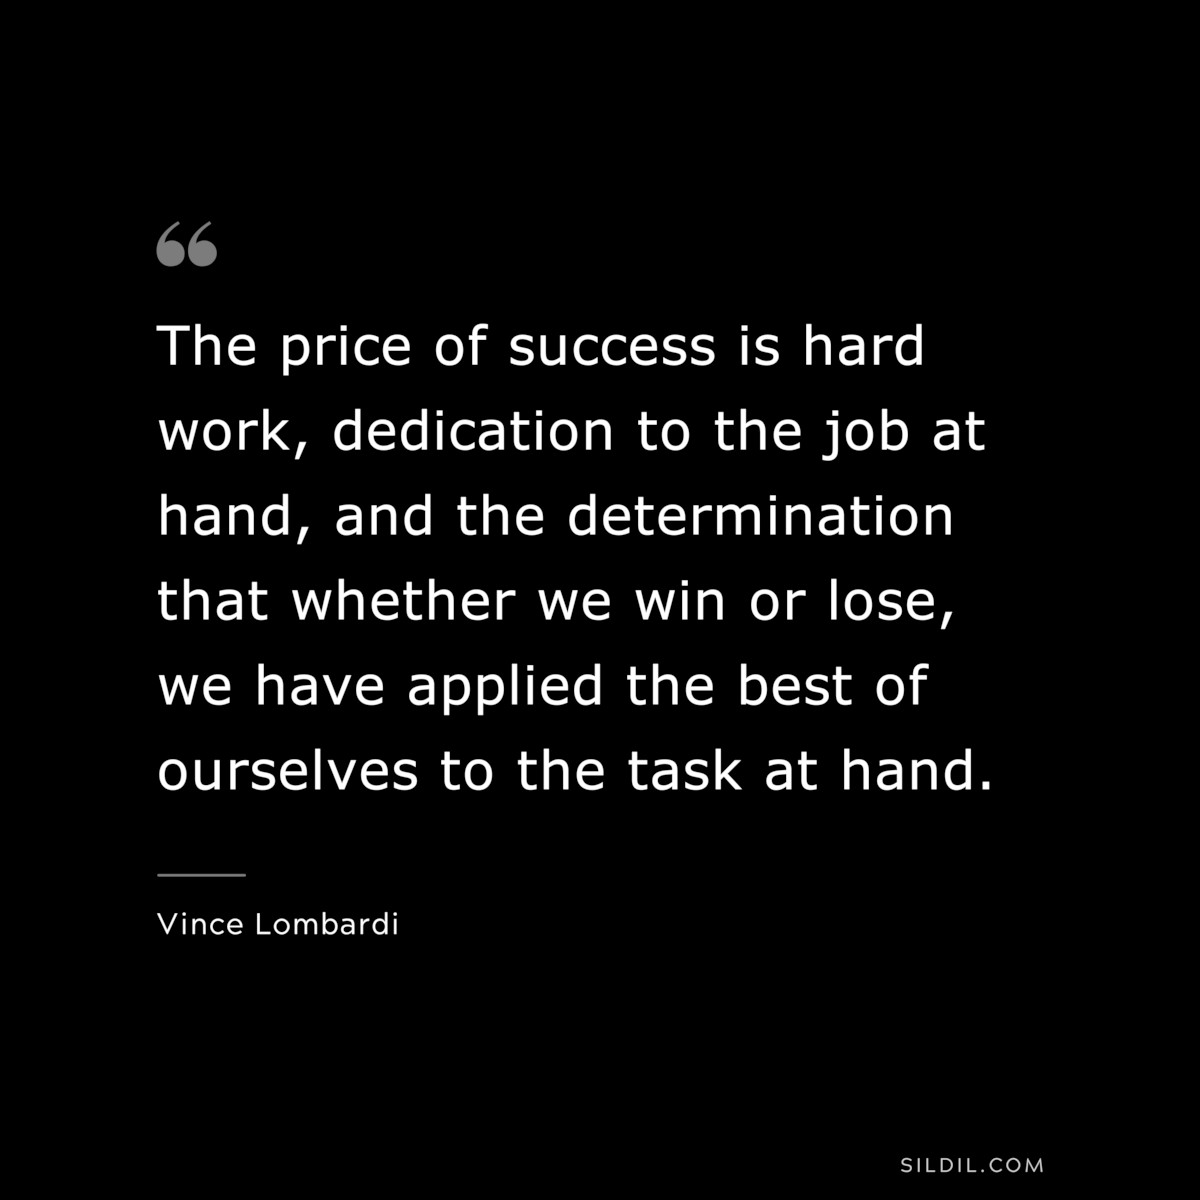 The price of success is hard work, dedication to the job at hand, and the determination that whether we win or lose, we have applied the best of ourselves to the task at hand. ― Vince Lombardi